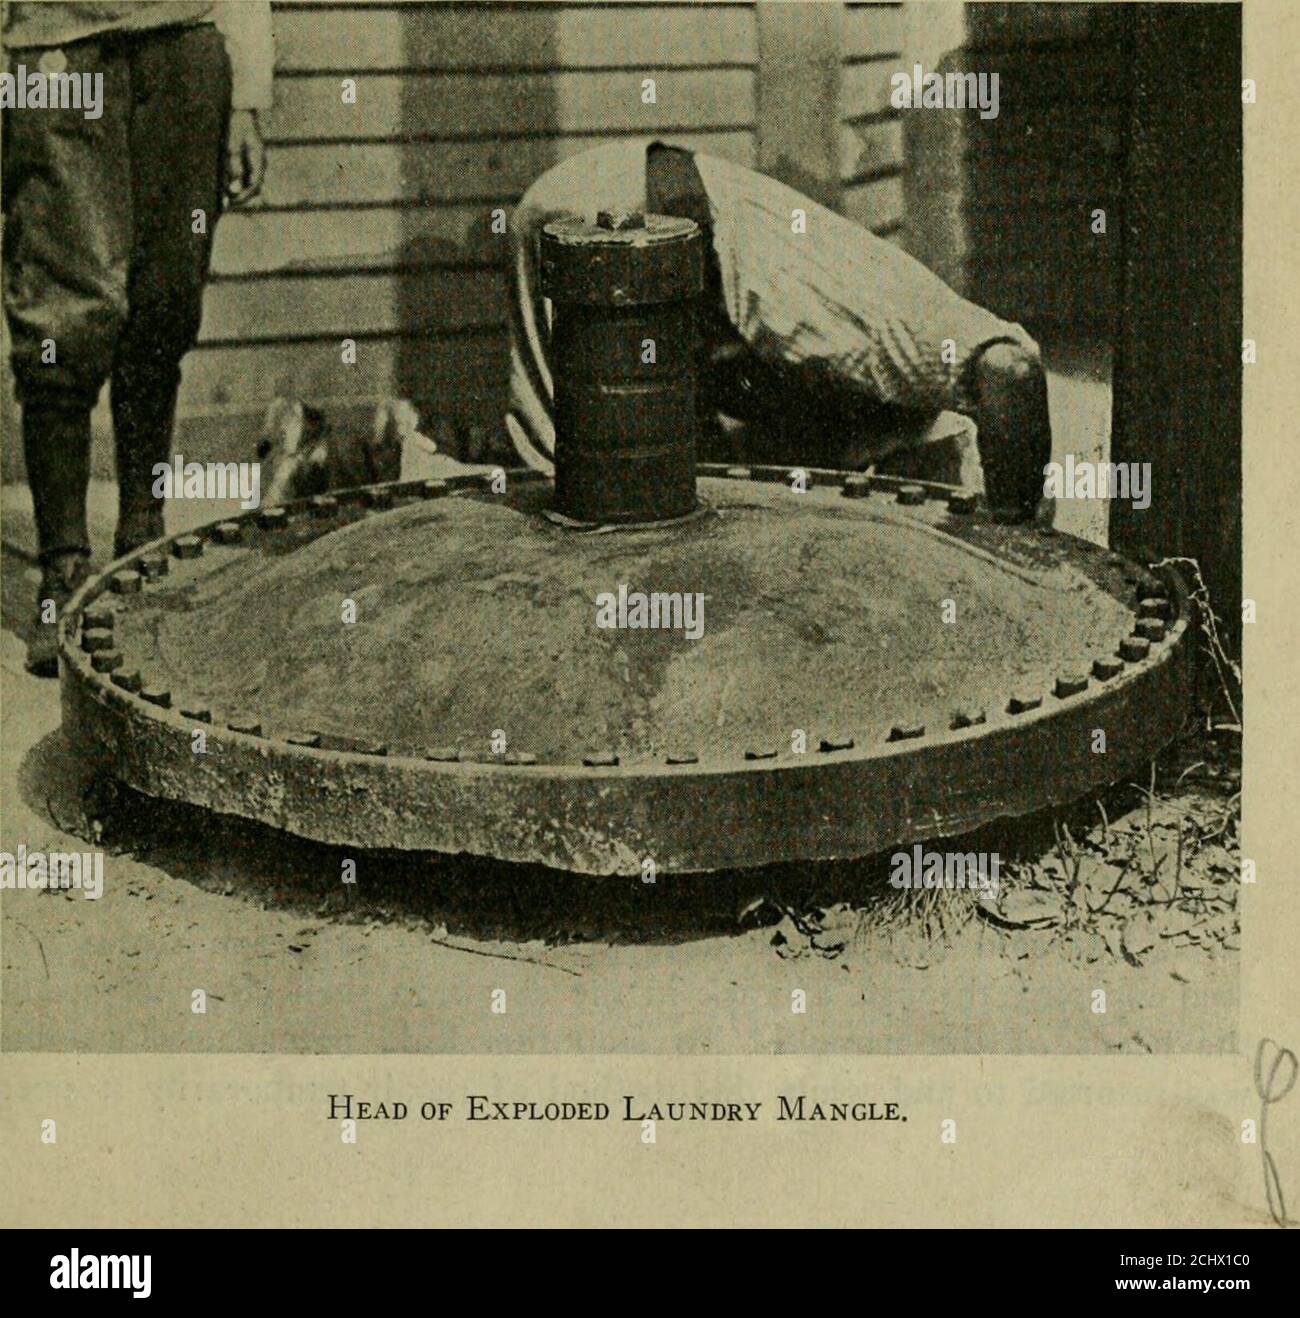 . The Locomotive . Devoted to Power Plant Protection Published Quarterly Vol. XXXIII. HARTFORD, CONN., OCTOBER, 1921. No. 8 COPYRIGHT. 1921, BY THE HARTFORD STEAM BOILER INSPECTION AND INSURANCE CO.. Head of Exploded Laundry Mangle, 226 THE LOCOMOTIVE. [October, Explosion of a Laundry Mangle. The guests of the Hotel Pemberton and the residents of Hull,Mass., had an element of terror injected into their peaceful summerlife on August nth by the explosion of a mangle in the laundry ofthe hotel. A newspaper account in The Boston Post for August 12thstated that the explosion wrecked the laundry, to Stock Photo